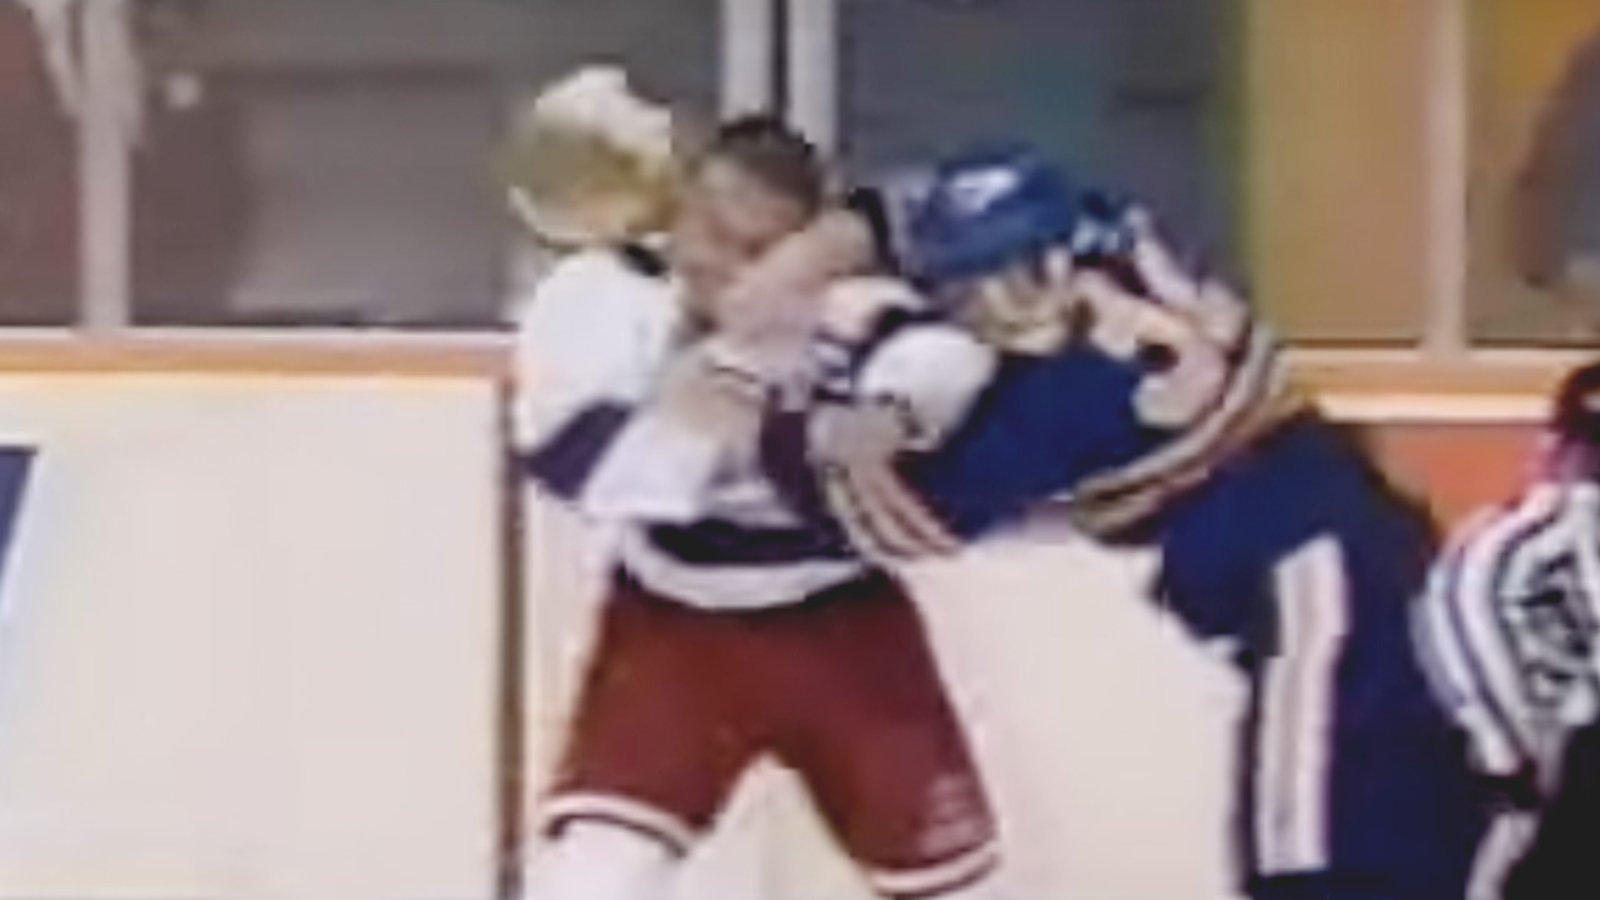 Must see : Rob Ray vs Tie Domi on Feb. 10 1993.